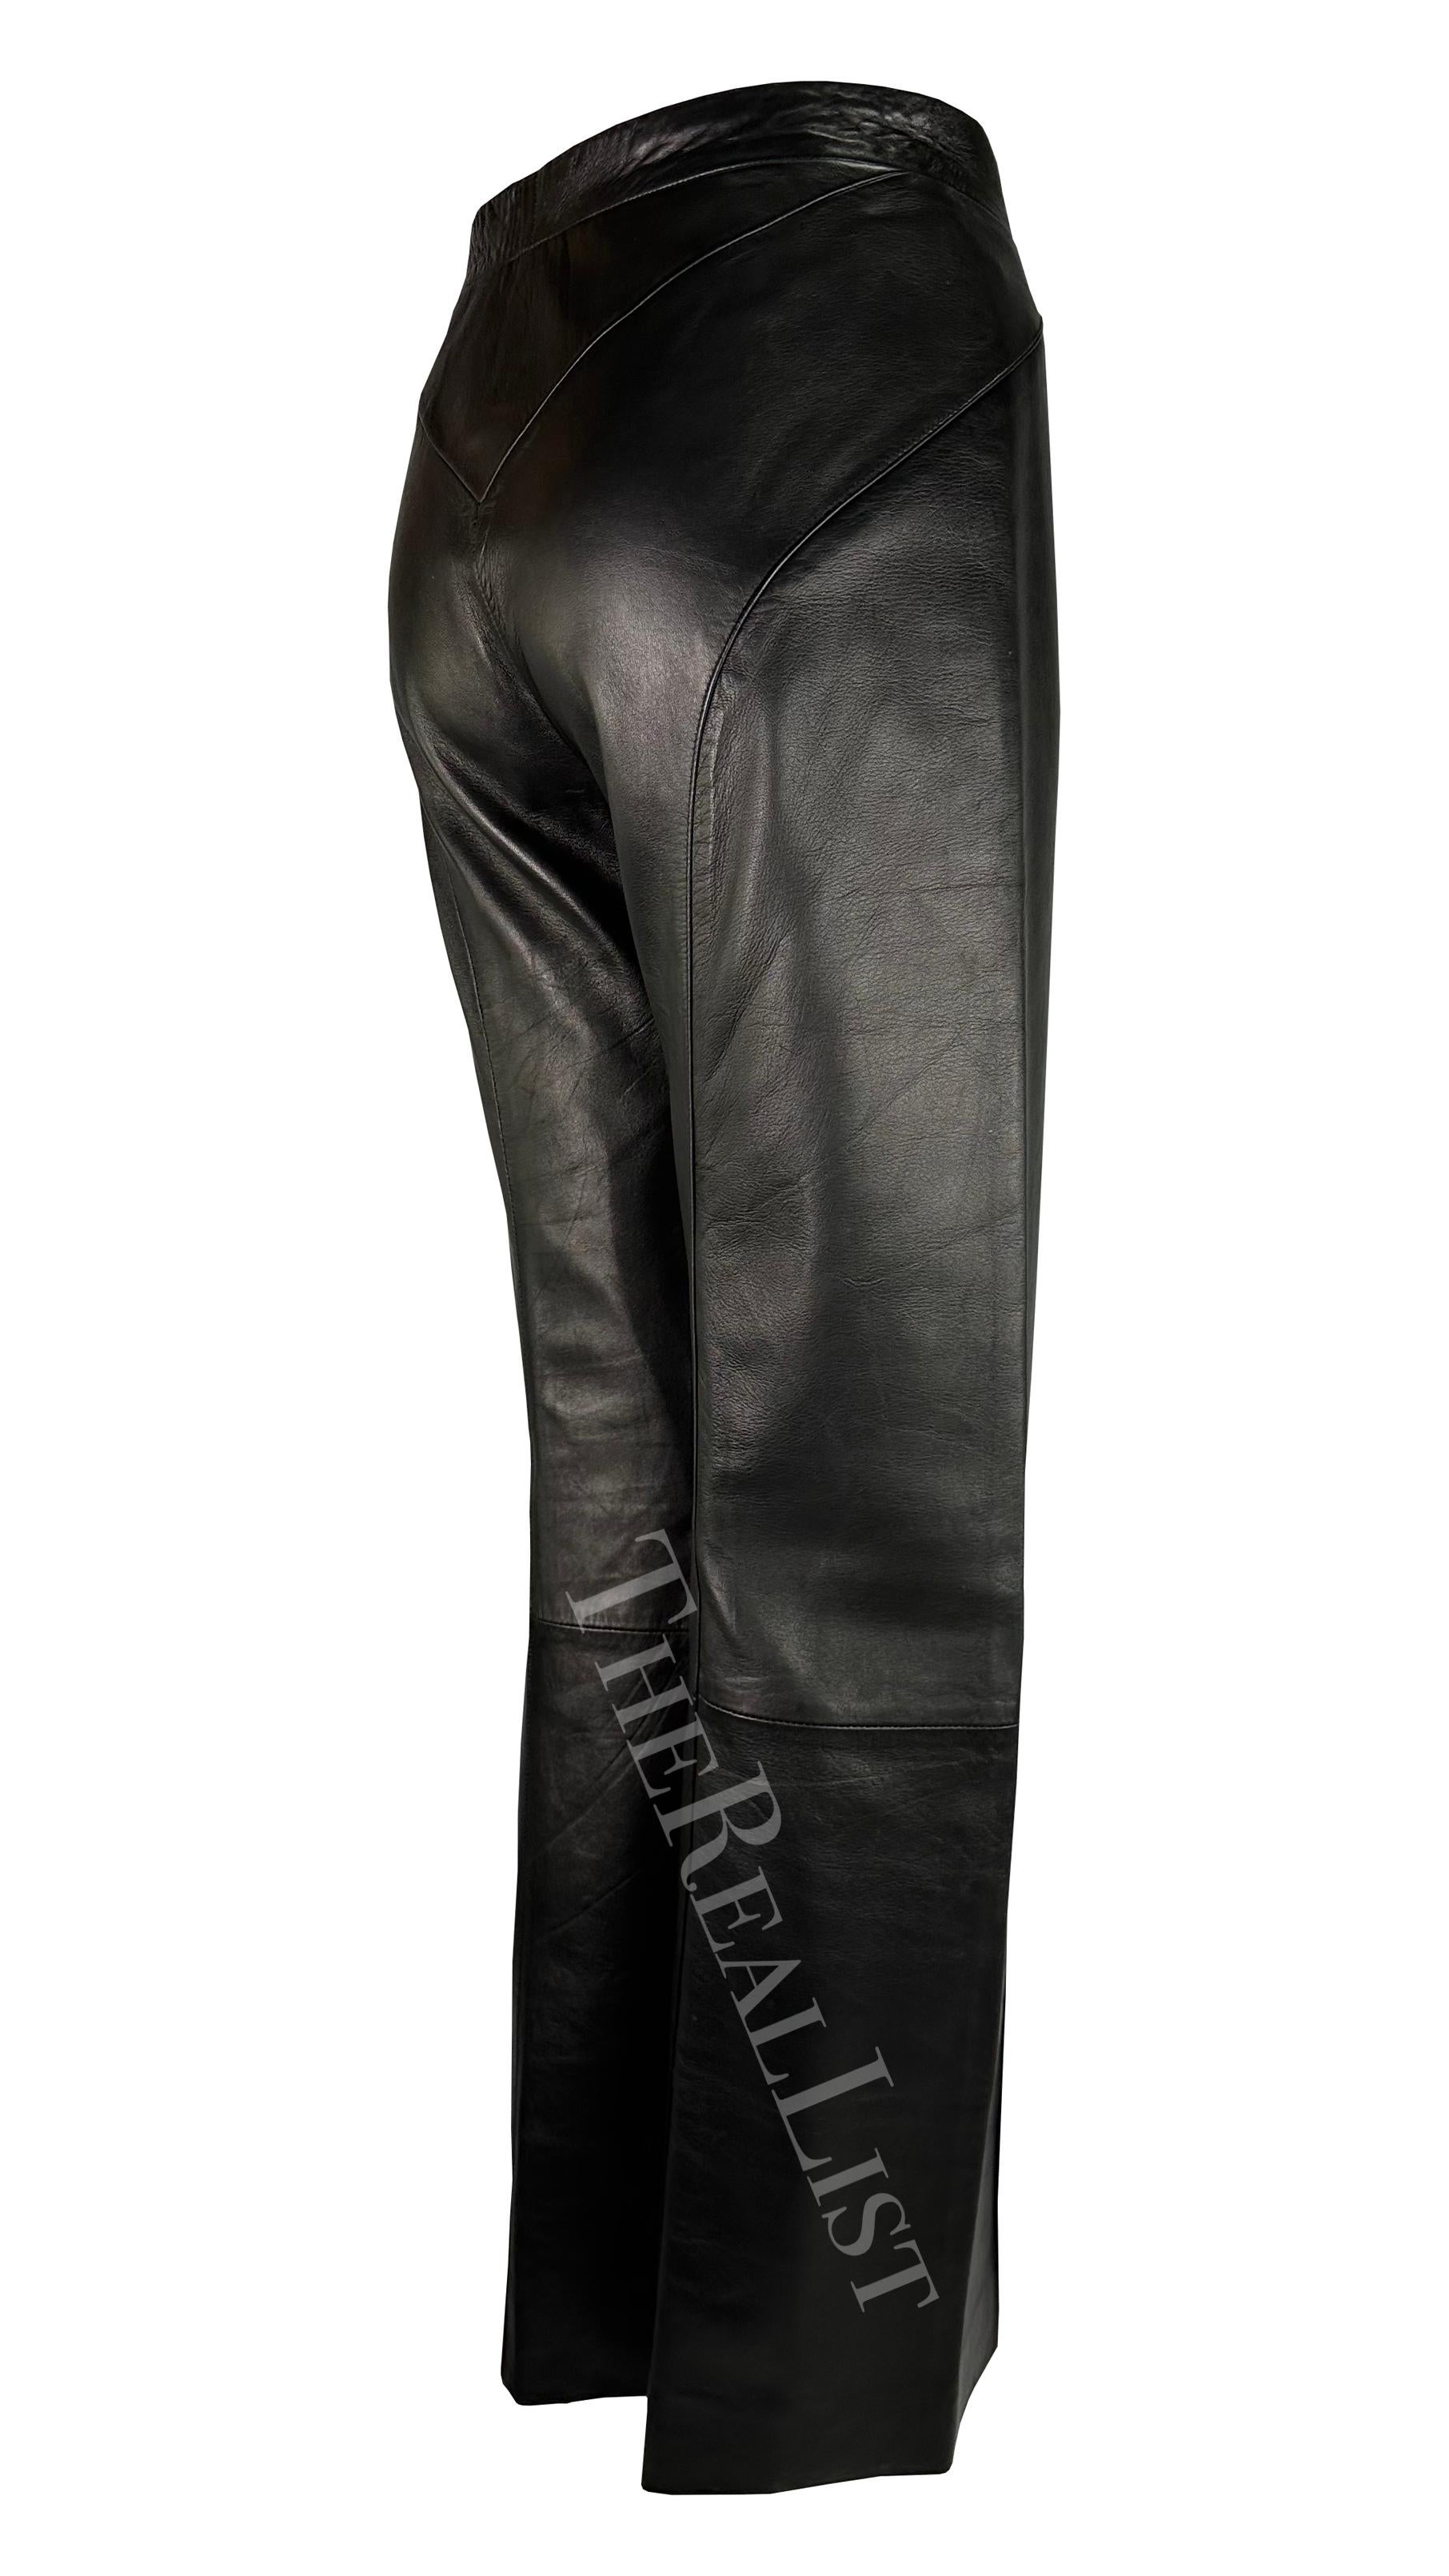 Presenting a pair of black leather Gianni Versace pants, designed by Donatella Versace. From the early 2000s, these black leather pants are accentuated by a front pleat on each leg and a flattering high waist. Enhance your collection with these